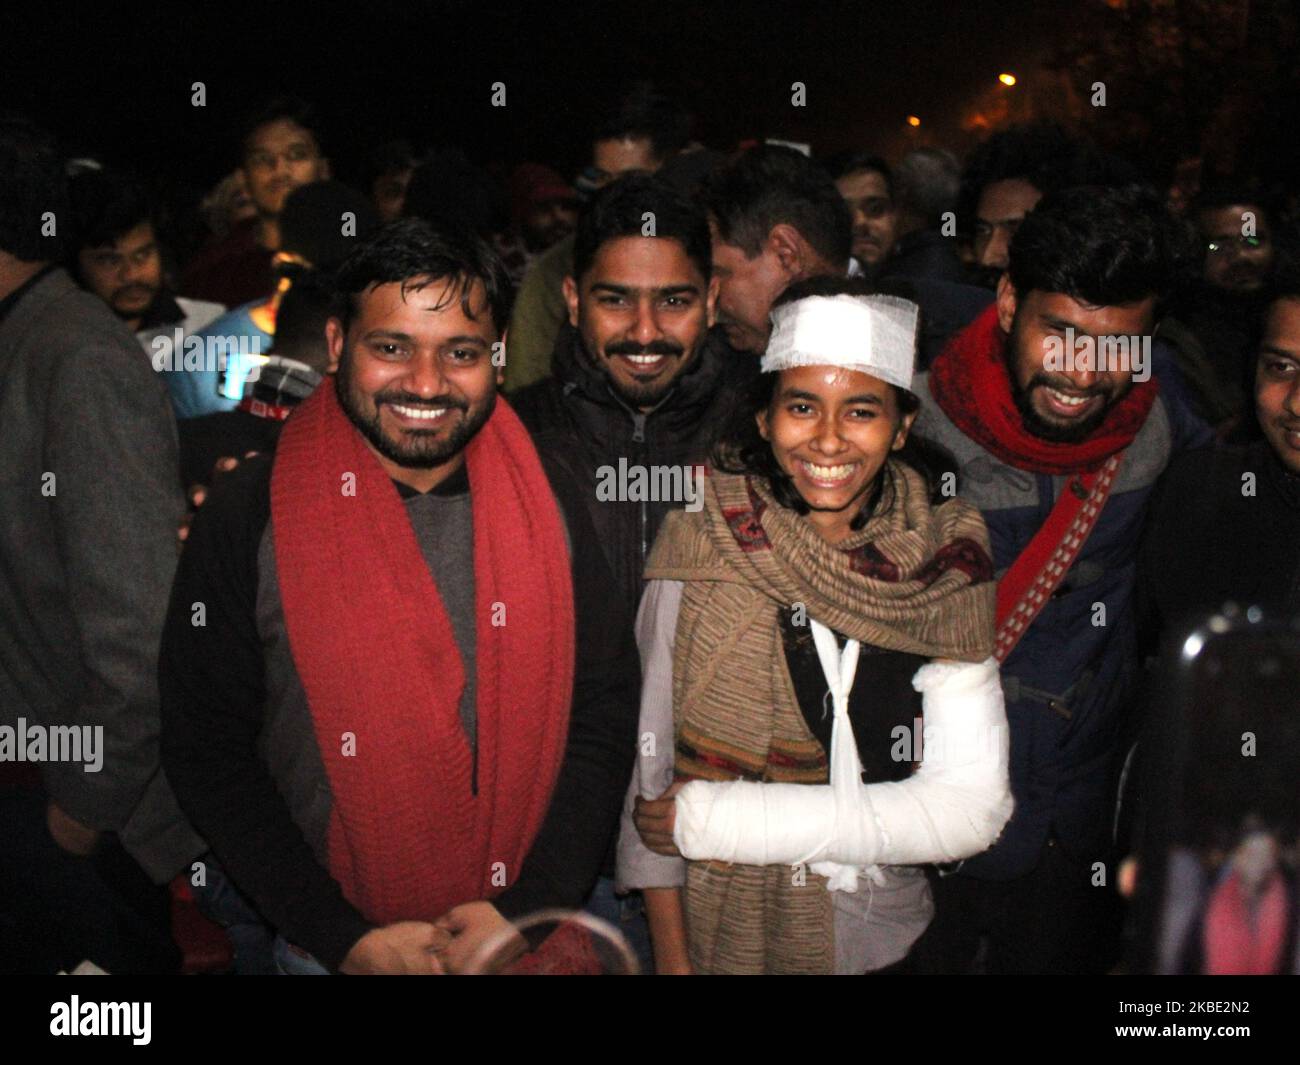 Former JNUSU president Kanhaiya Kumar and current JNUSU president Aishe Ghosh during the gathering, outside Sabarmati Hostel on January 7, 2020 in New Delhi, India. A group of masked goons barged into the university on Sunday and attacked several students and teachers, went on a rampage, injuring 34 people. (Photo by Mayank Makhija/NurPhoto) Stock Photo